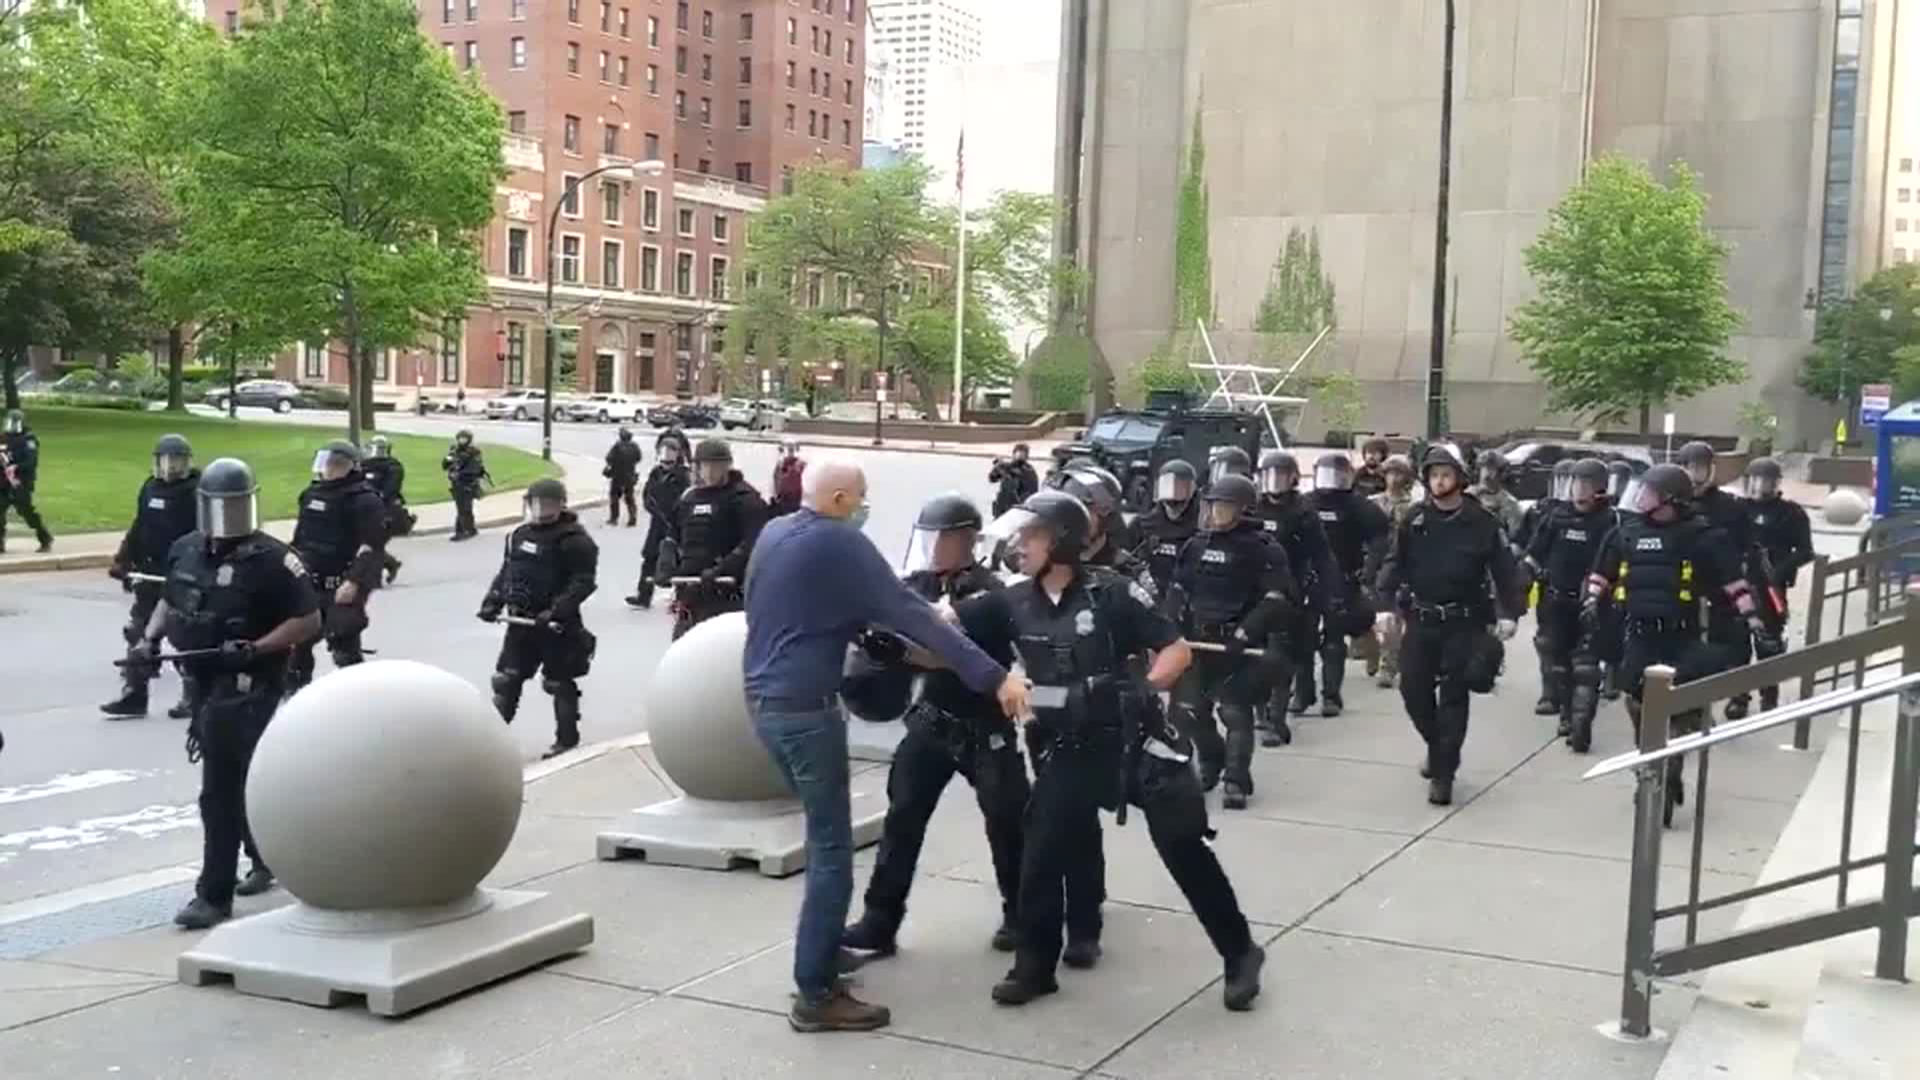 Martin Gugino is shoved by Buffalo Police Officers during a protest in Buffalo, New York, on June 4.